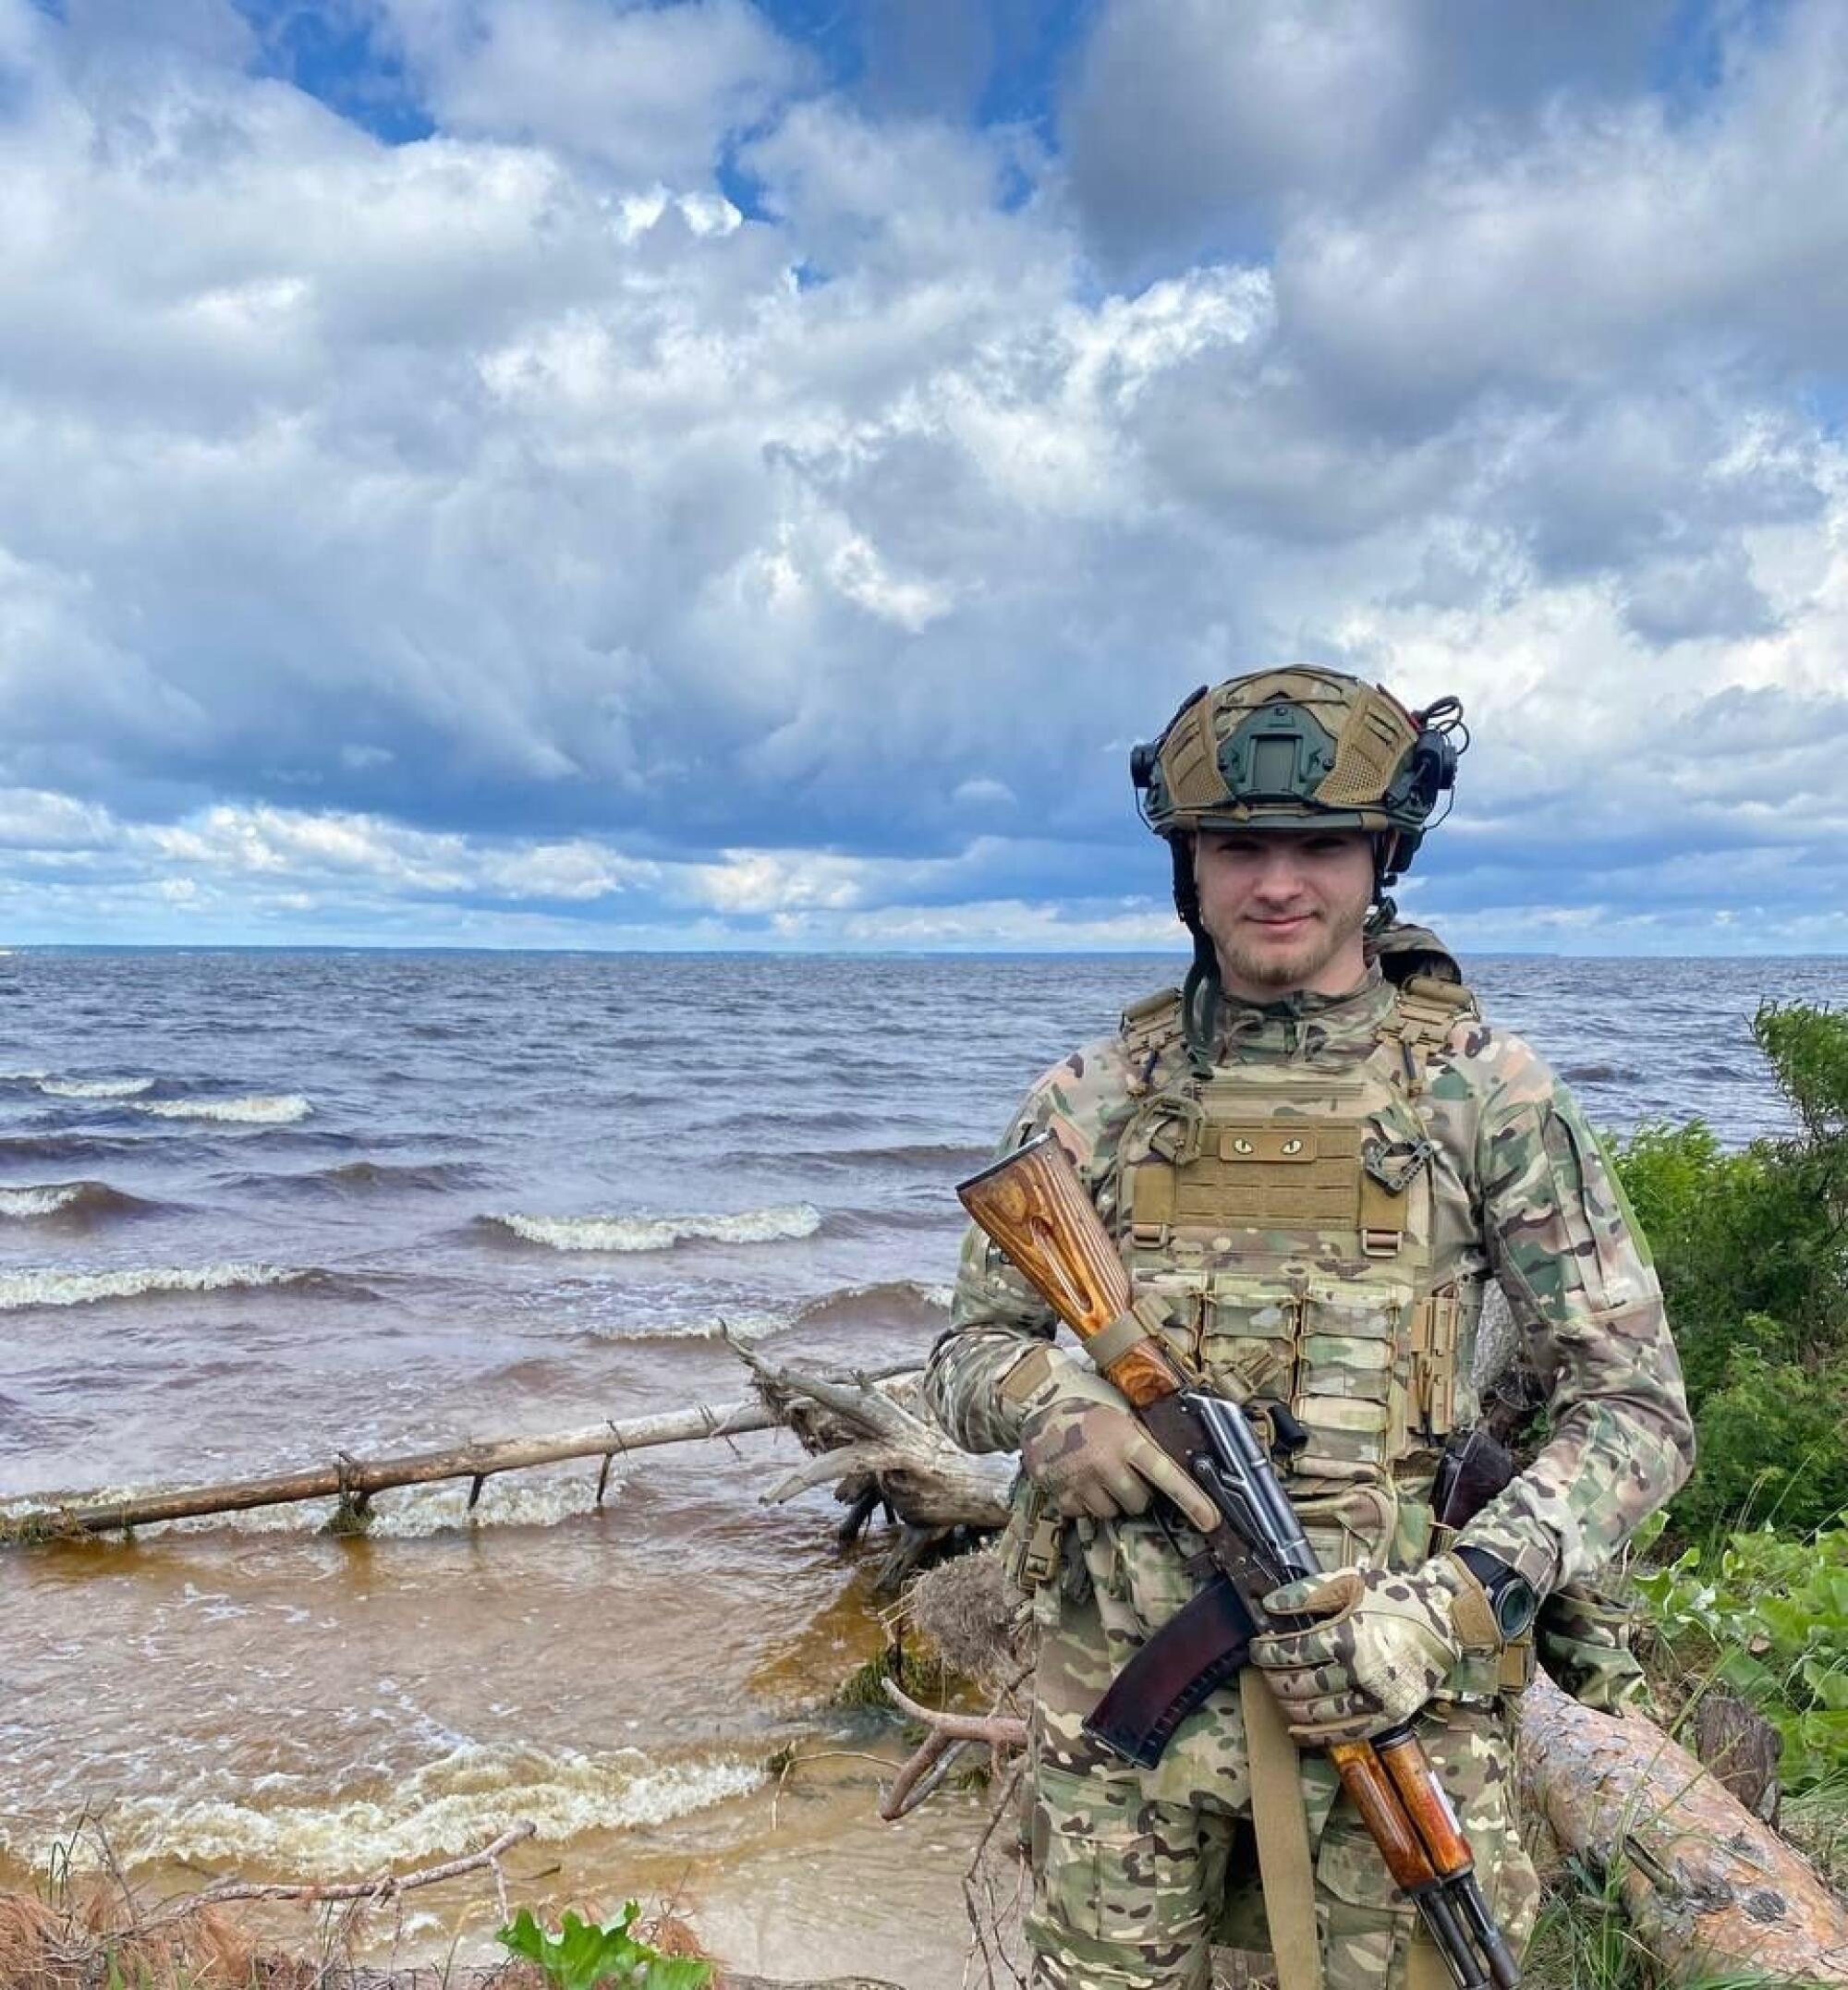 Oleksandr Kovalchuk during his stay in the 12th Azov Special Forces Brigade of the Ukrainian National Guard.